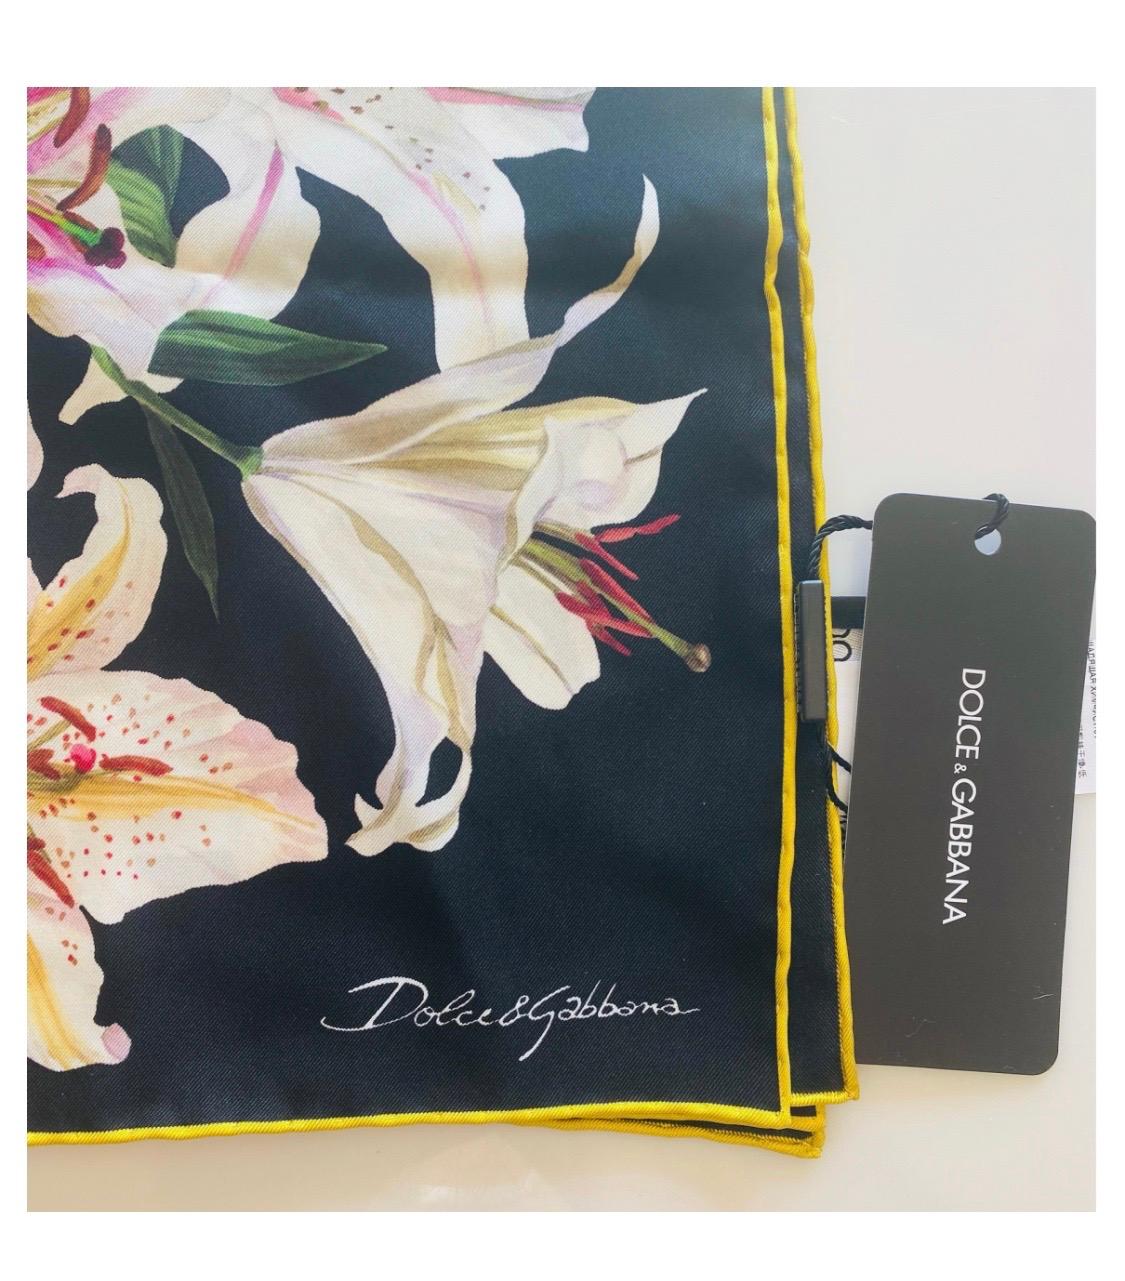  Dolce & Gabbana Black White Lilly
printed scarf

Size 70cmx 70cm

100% silk

Made in Italy

Brand new with tags

Please check my other DG clothing &
bags & accessories in this beautiful
print! 
